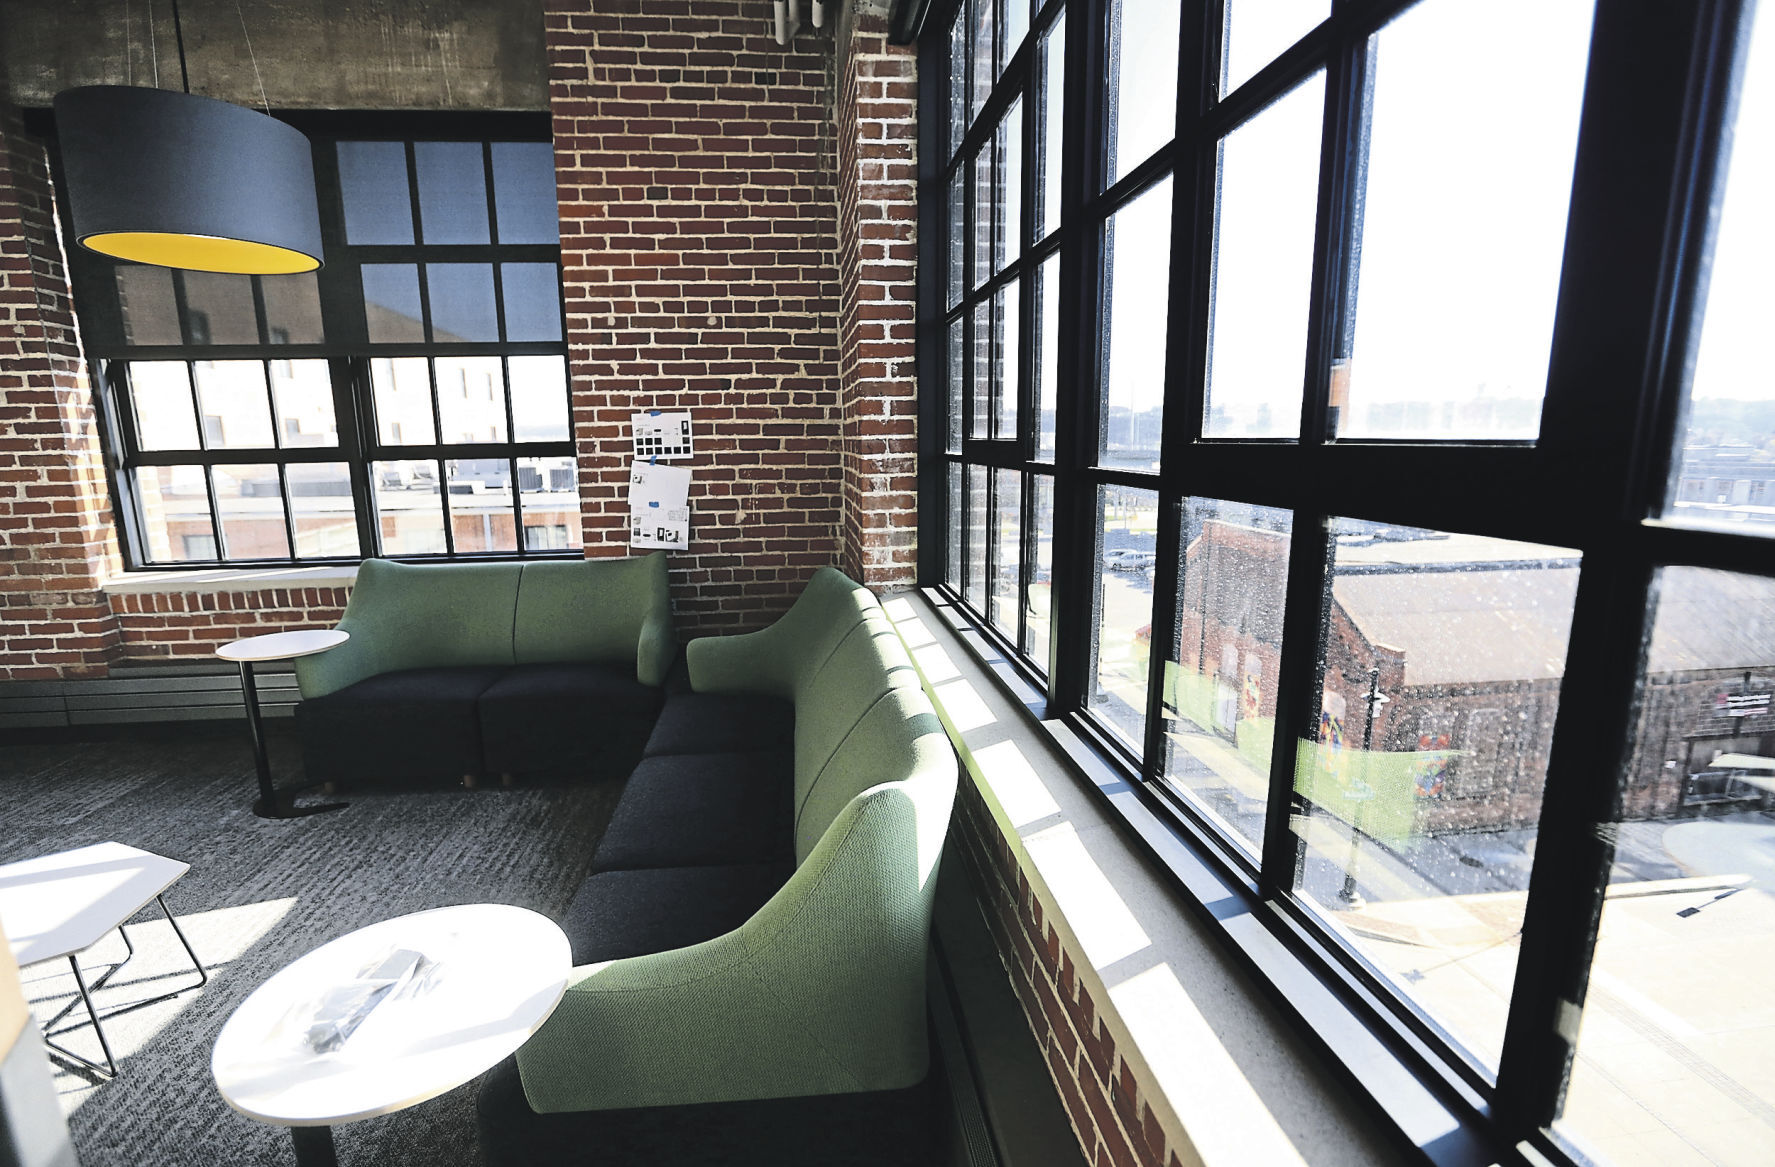 A lounge area at the Dupaco Voices Building.    PHOTO CREDIT: Jessica Reilly